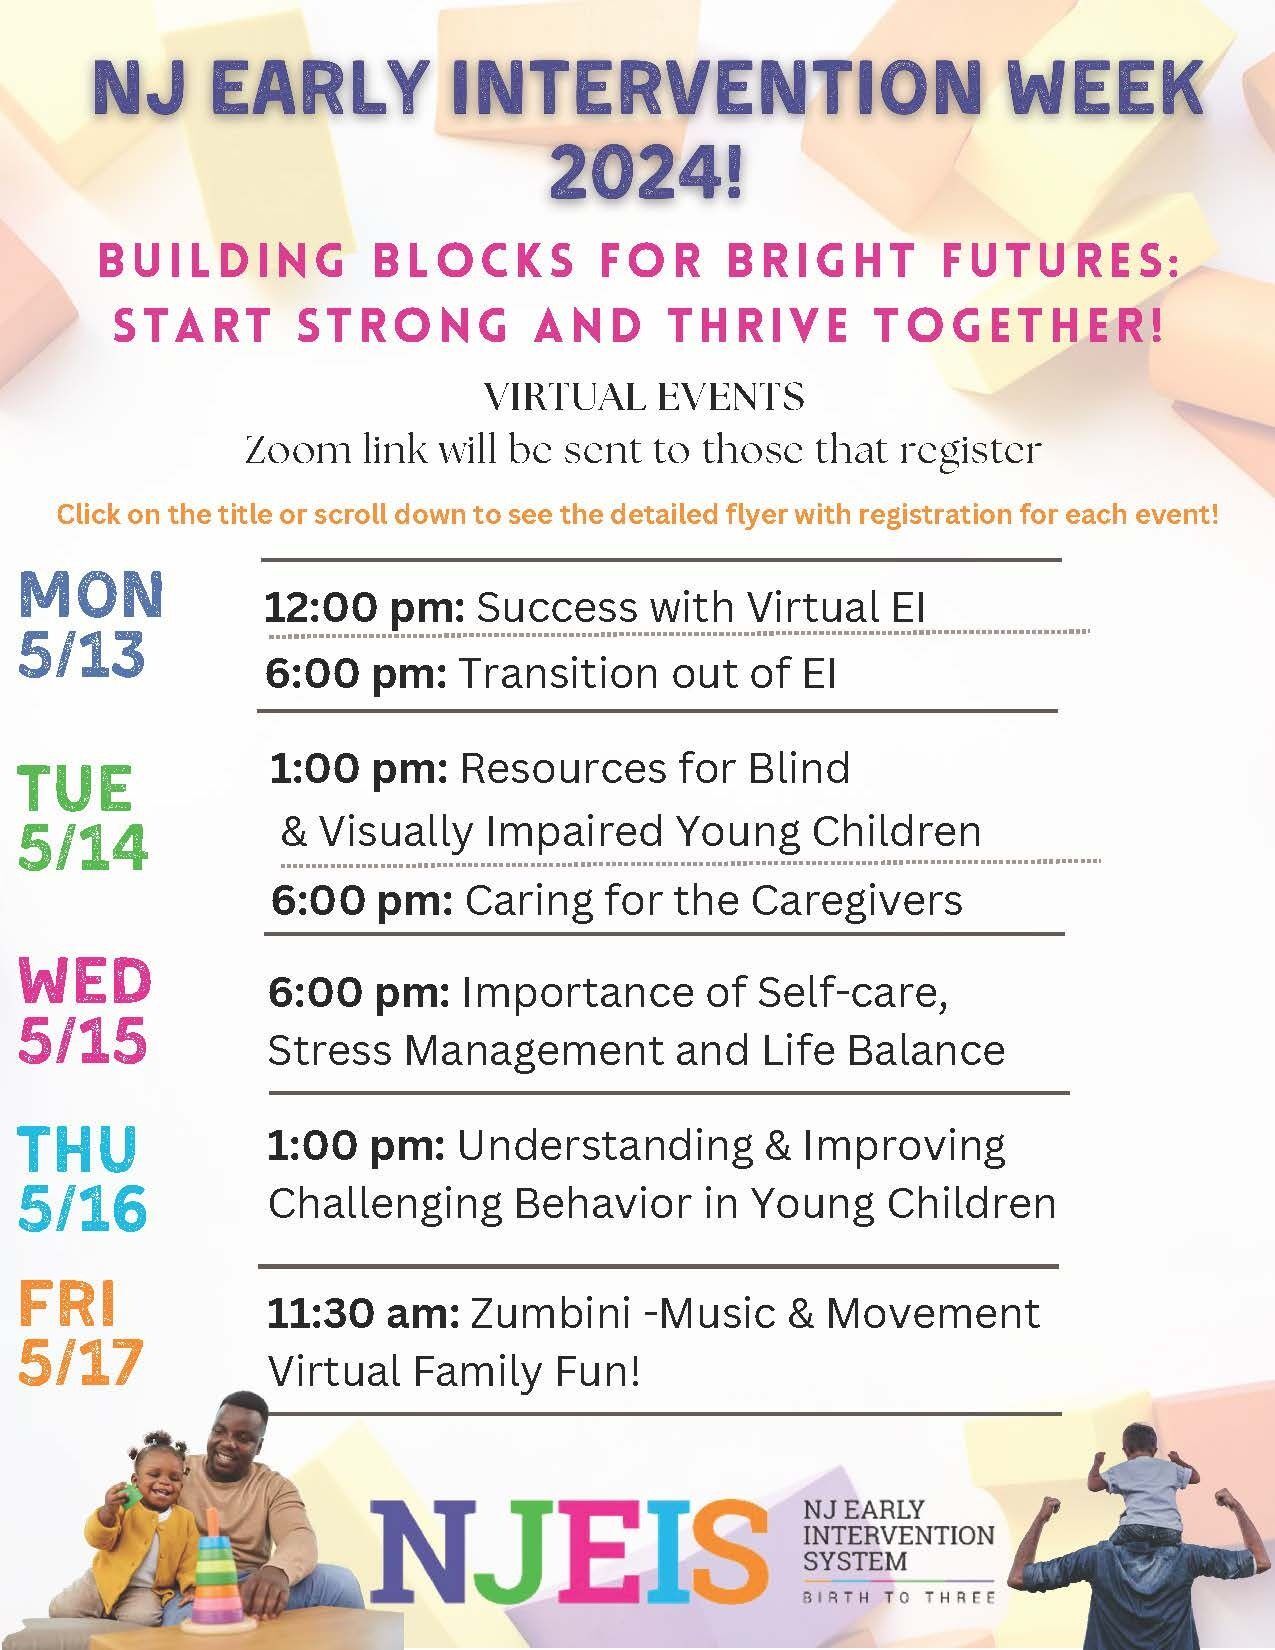 Early Intervention Week 2024: A Week of Free Virtual Events Dedicated to Empowerment and Support